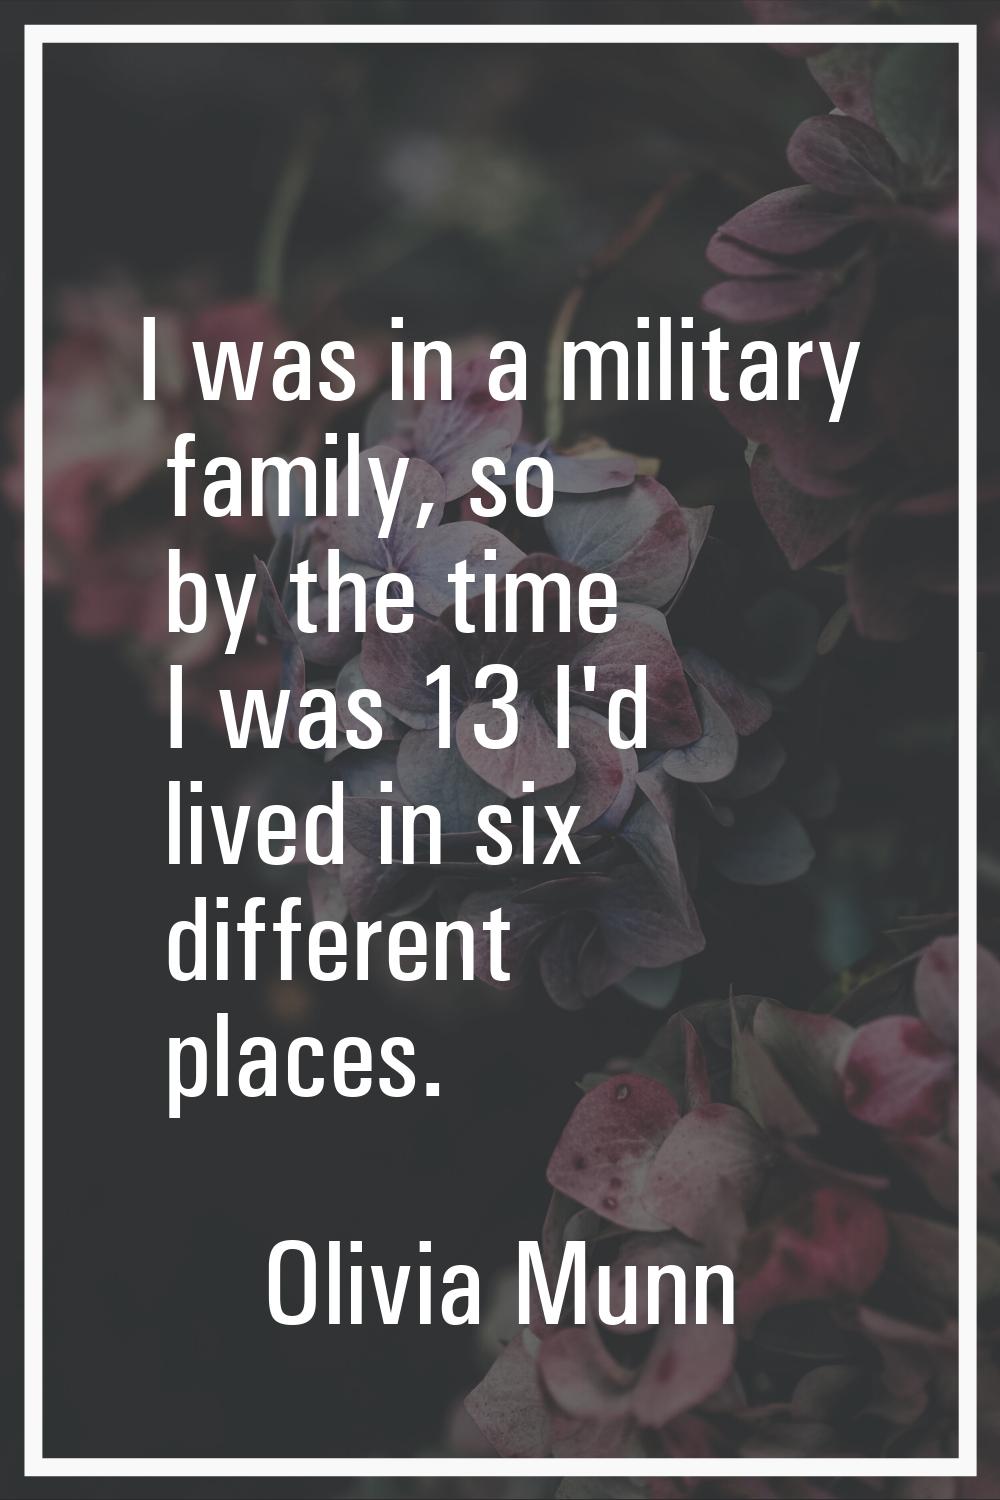 I was in a military family, so by the time I was 13 I'd lived in six different places.